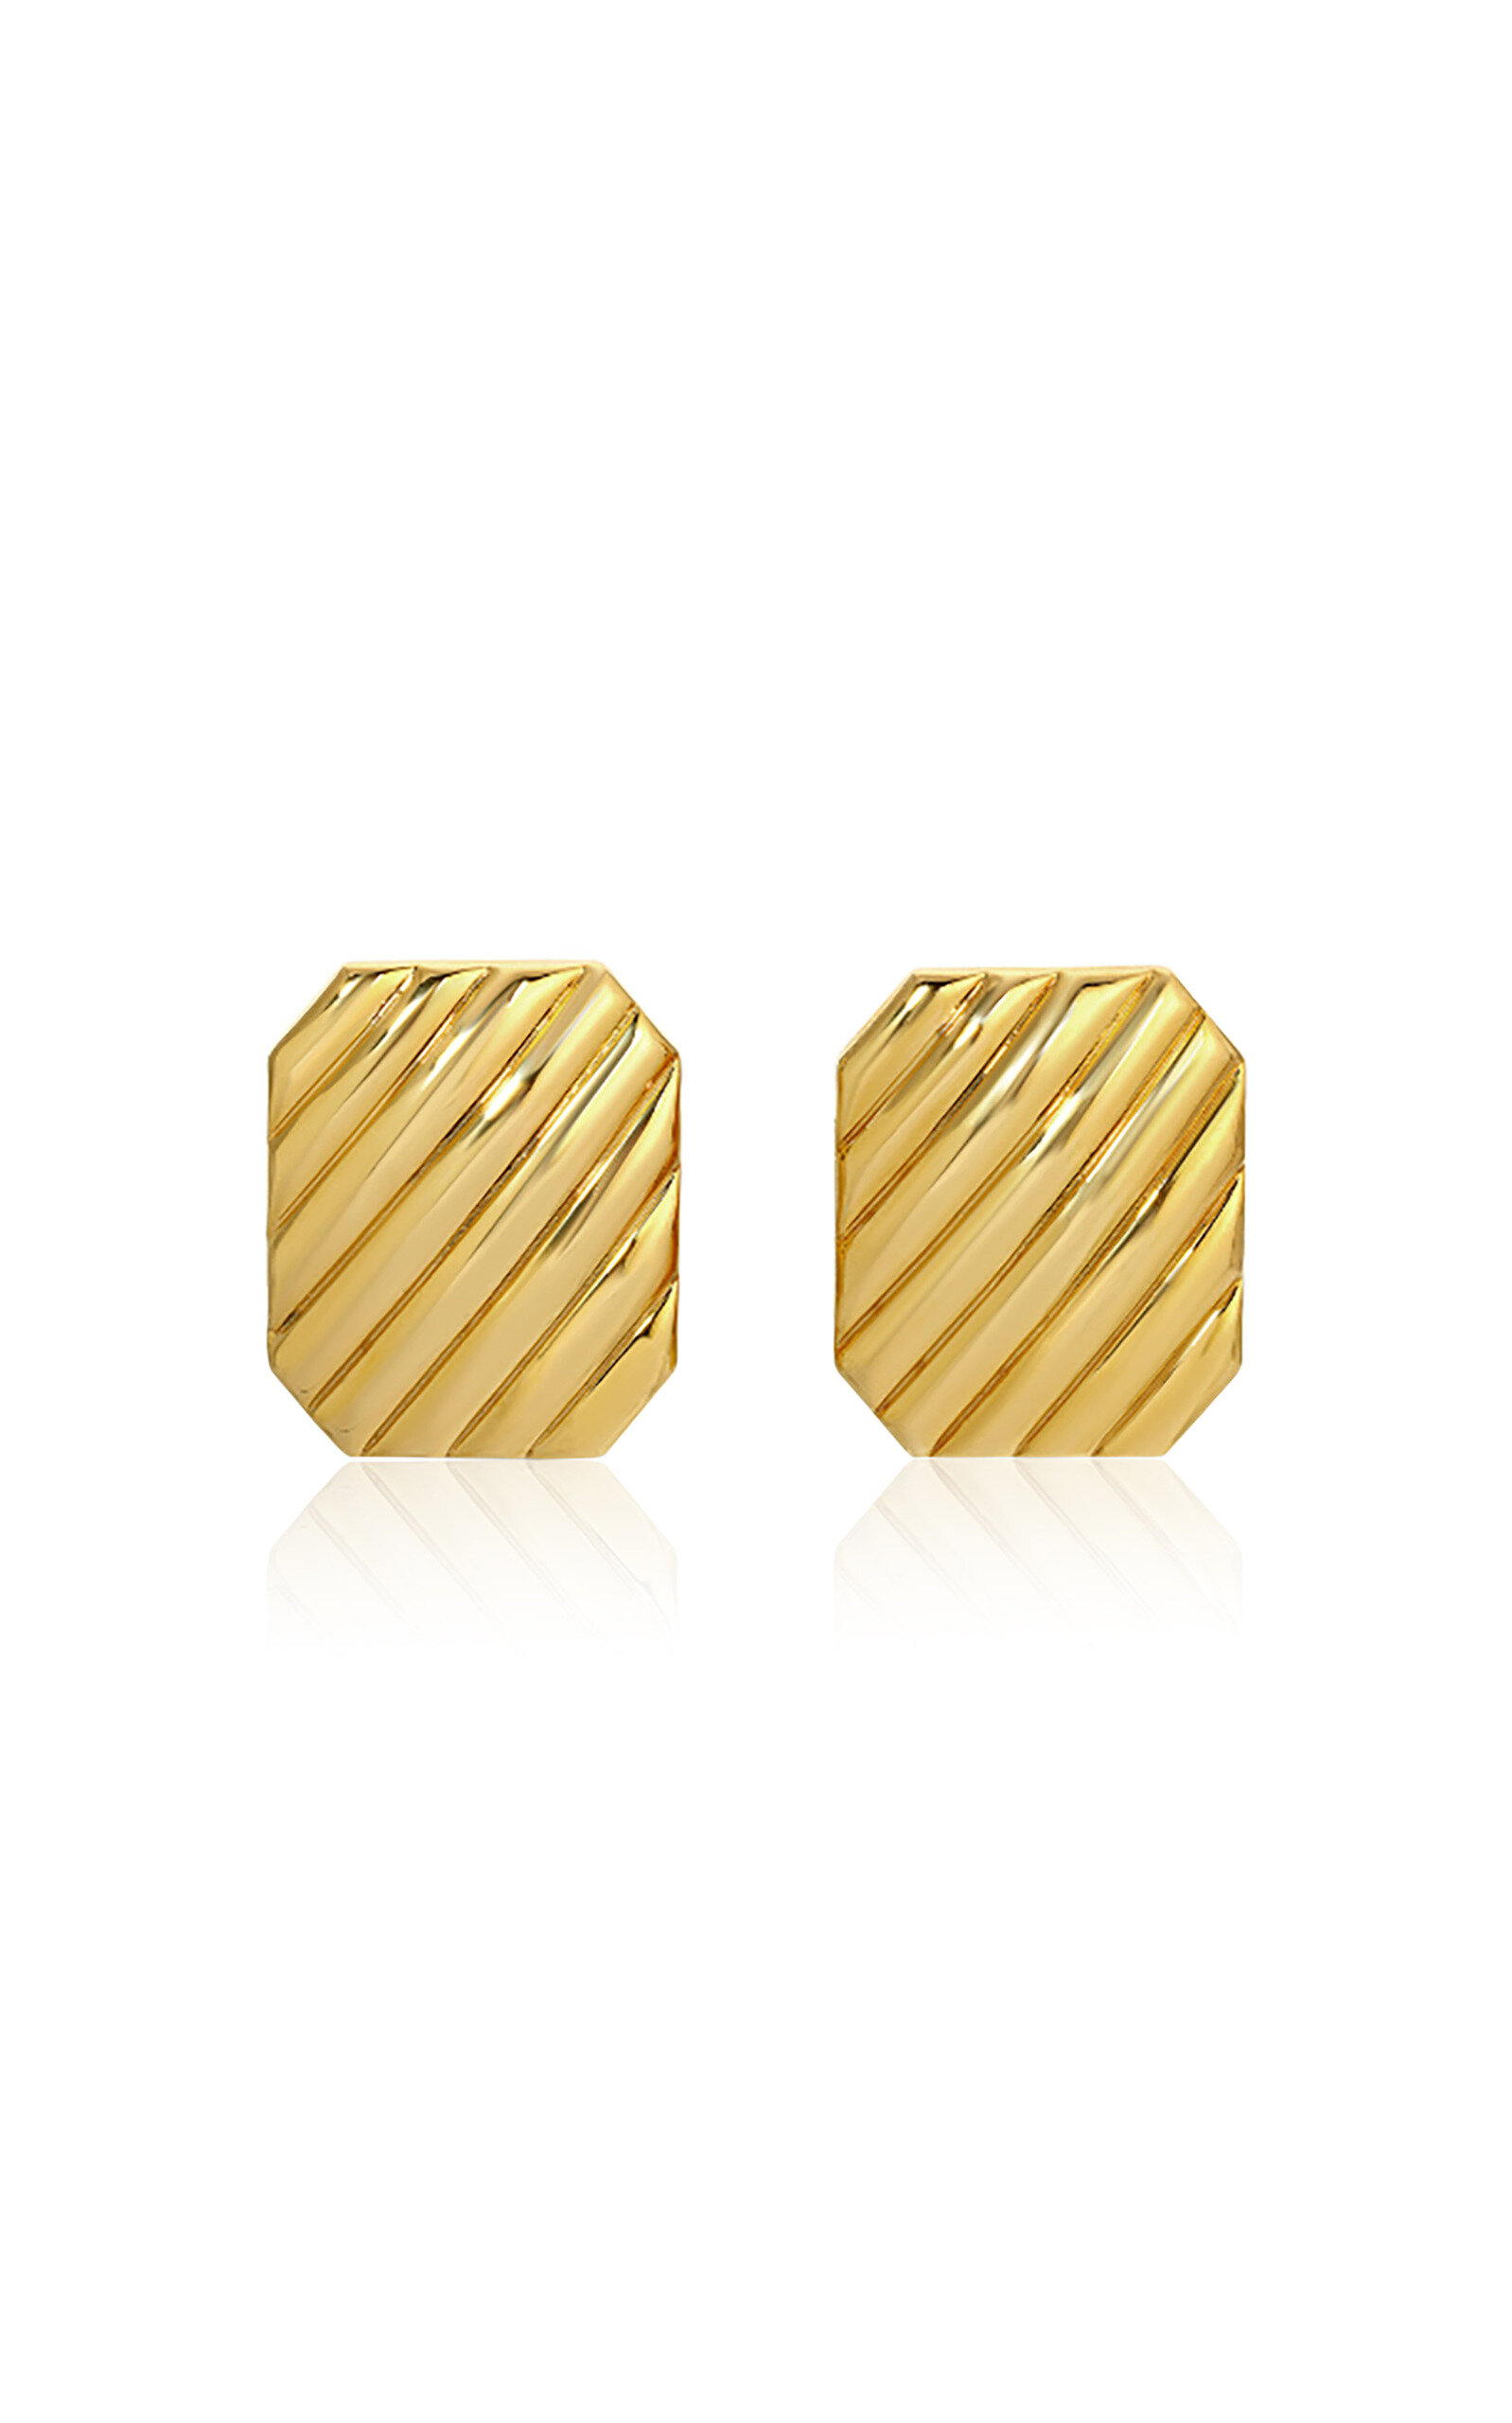 Treat Gold-Plated Earrings